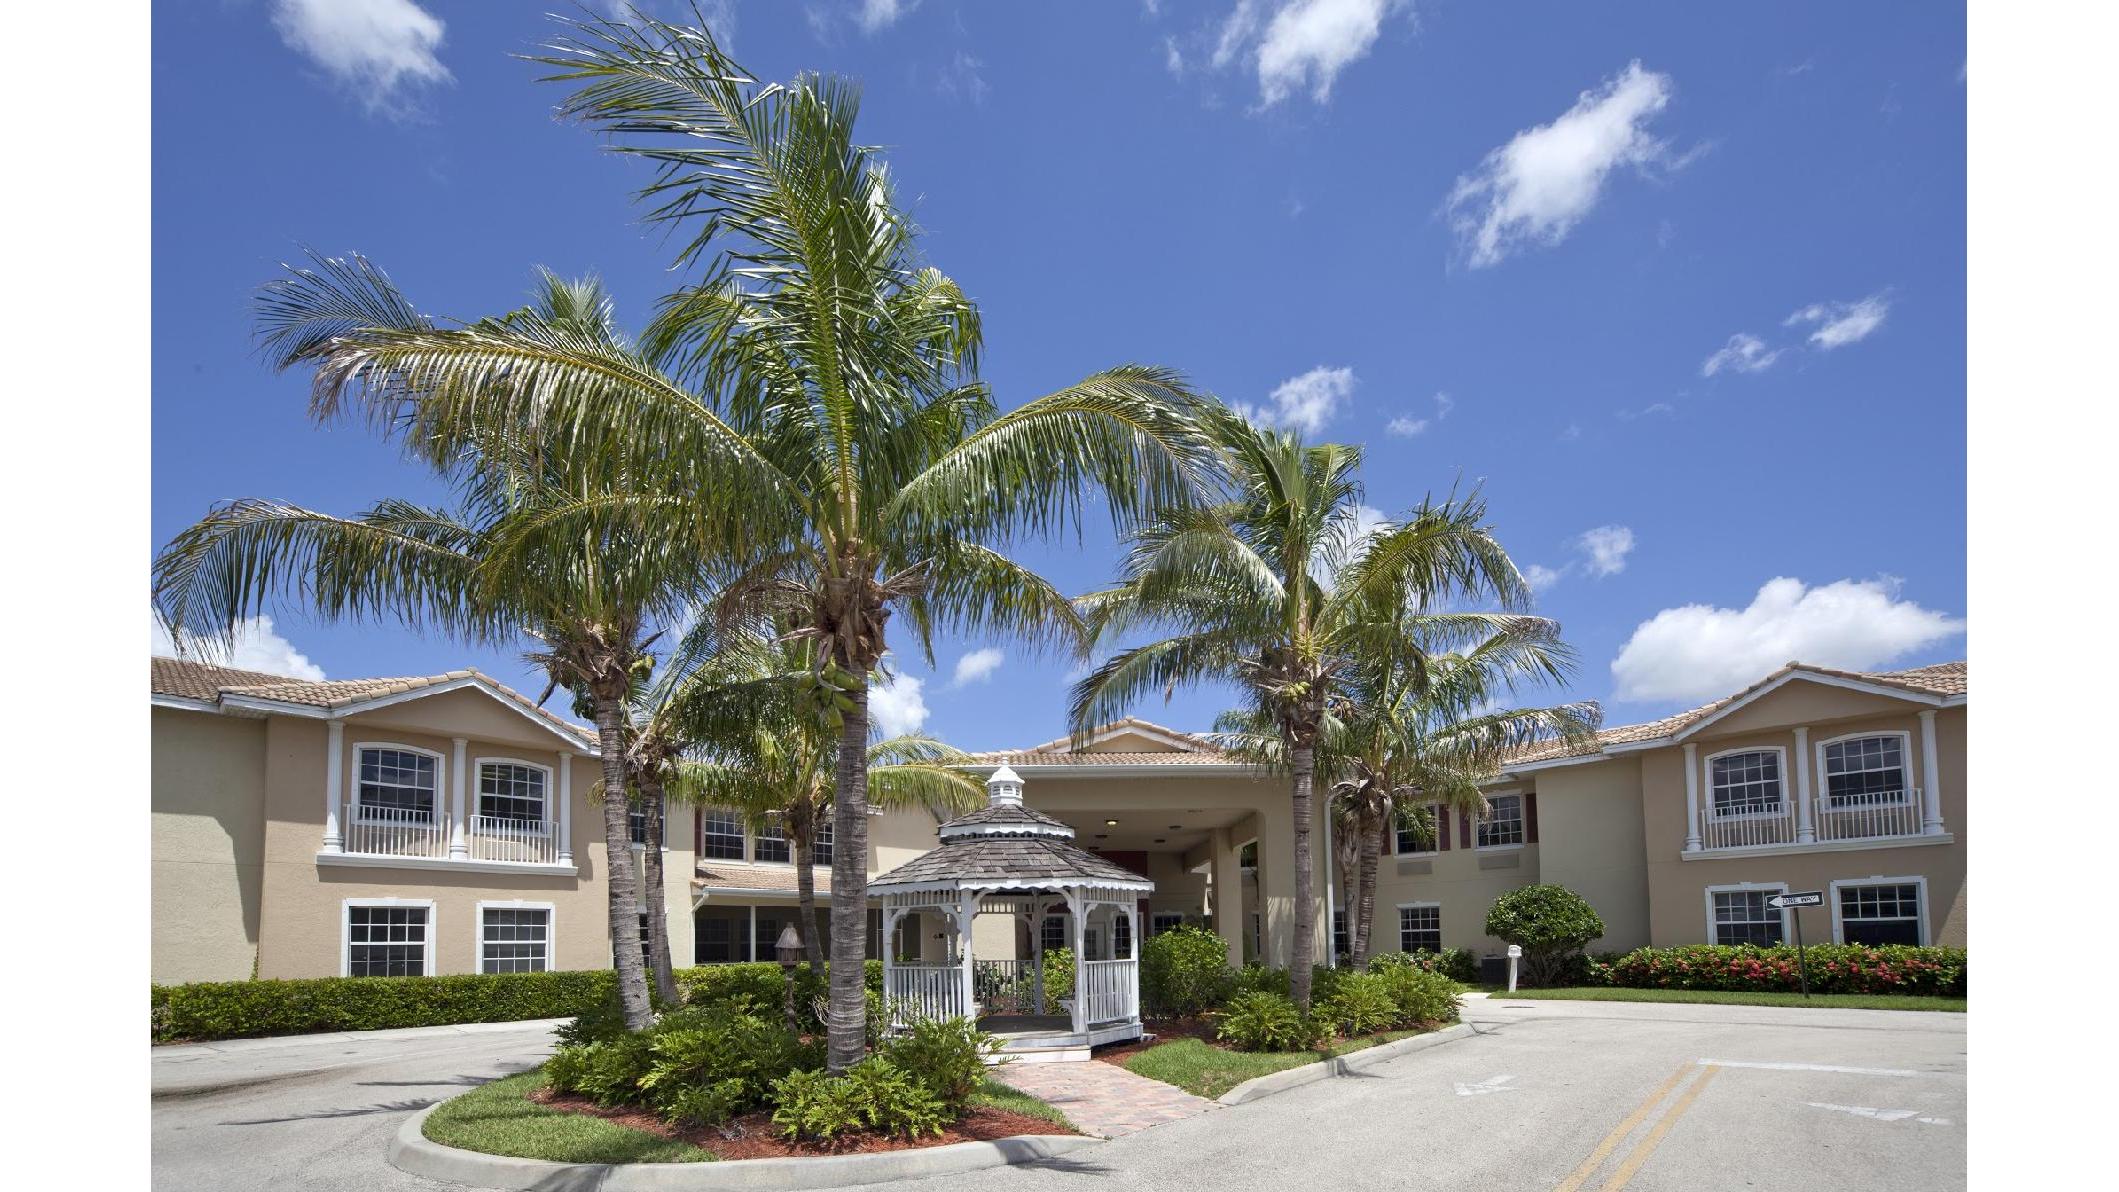 Living in Port St. Lucie, FL  Review the PROS and CONS 